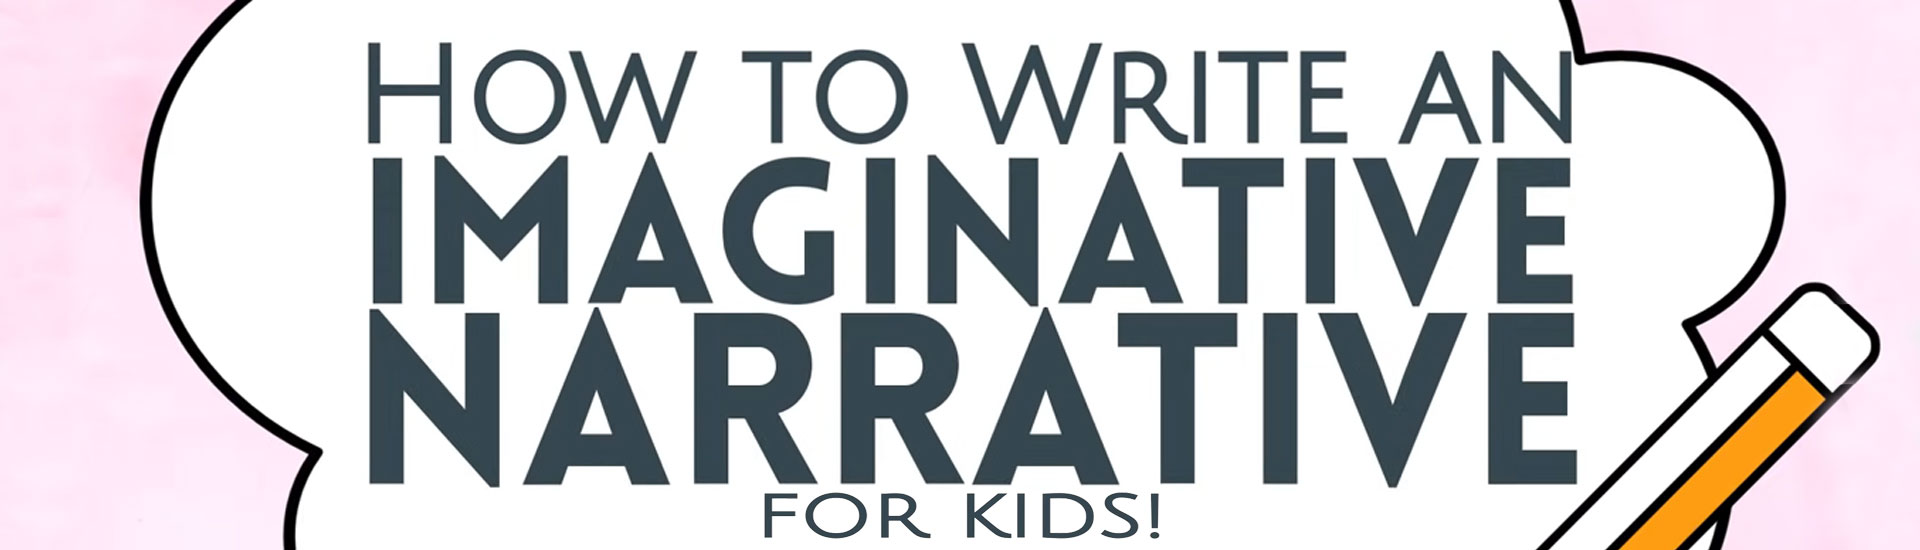 How to Write an Imaginative Narrative for Kids